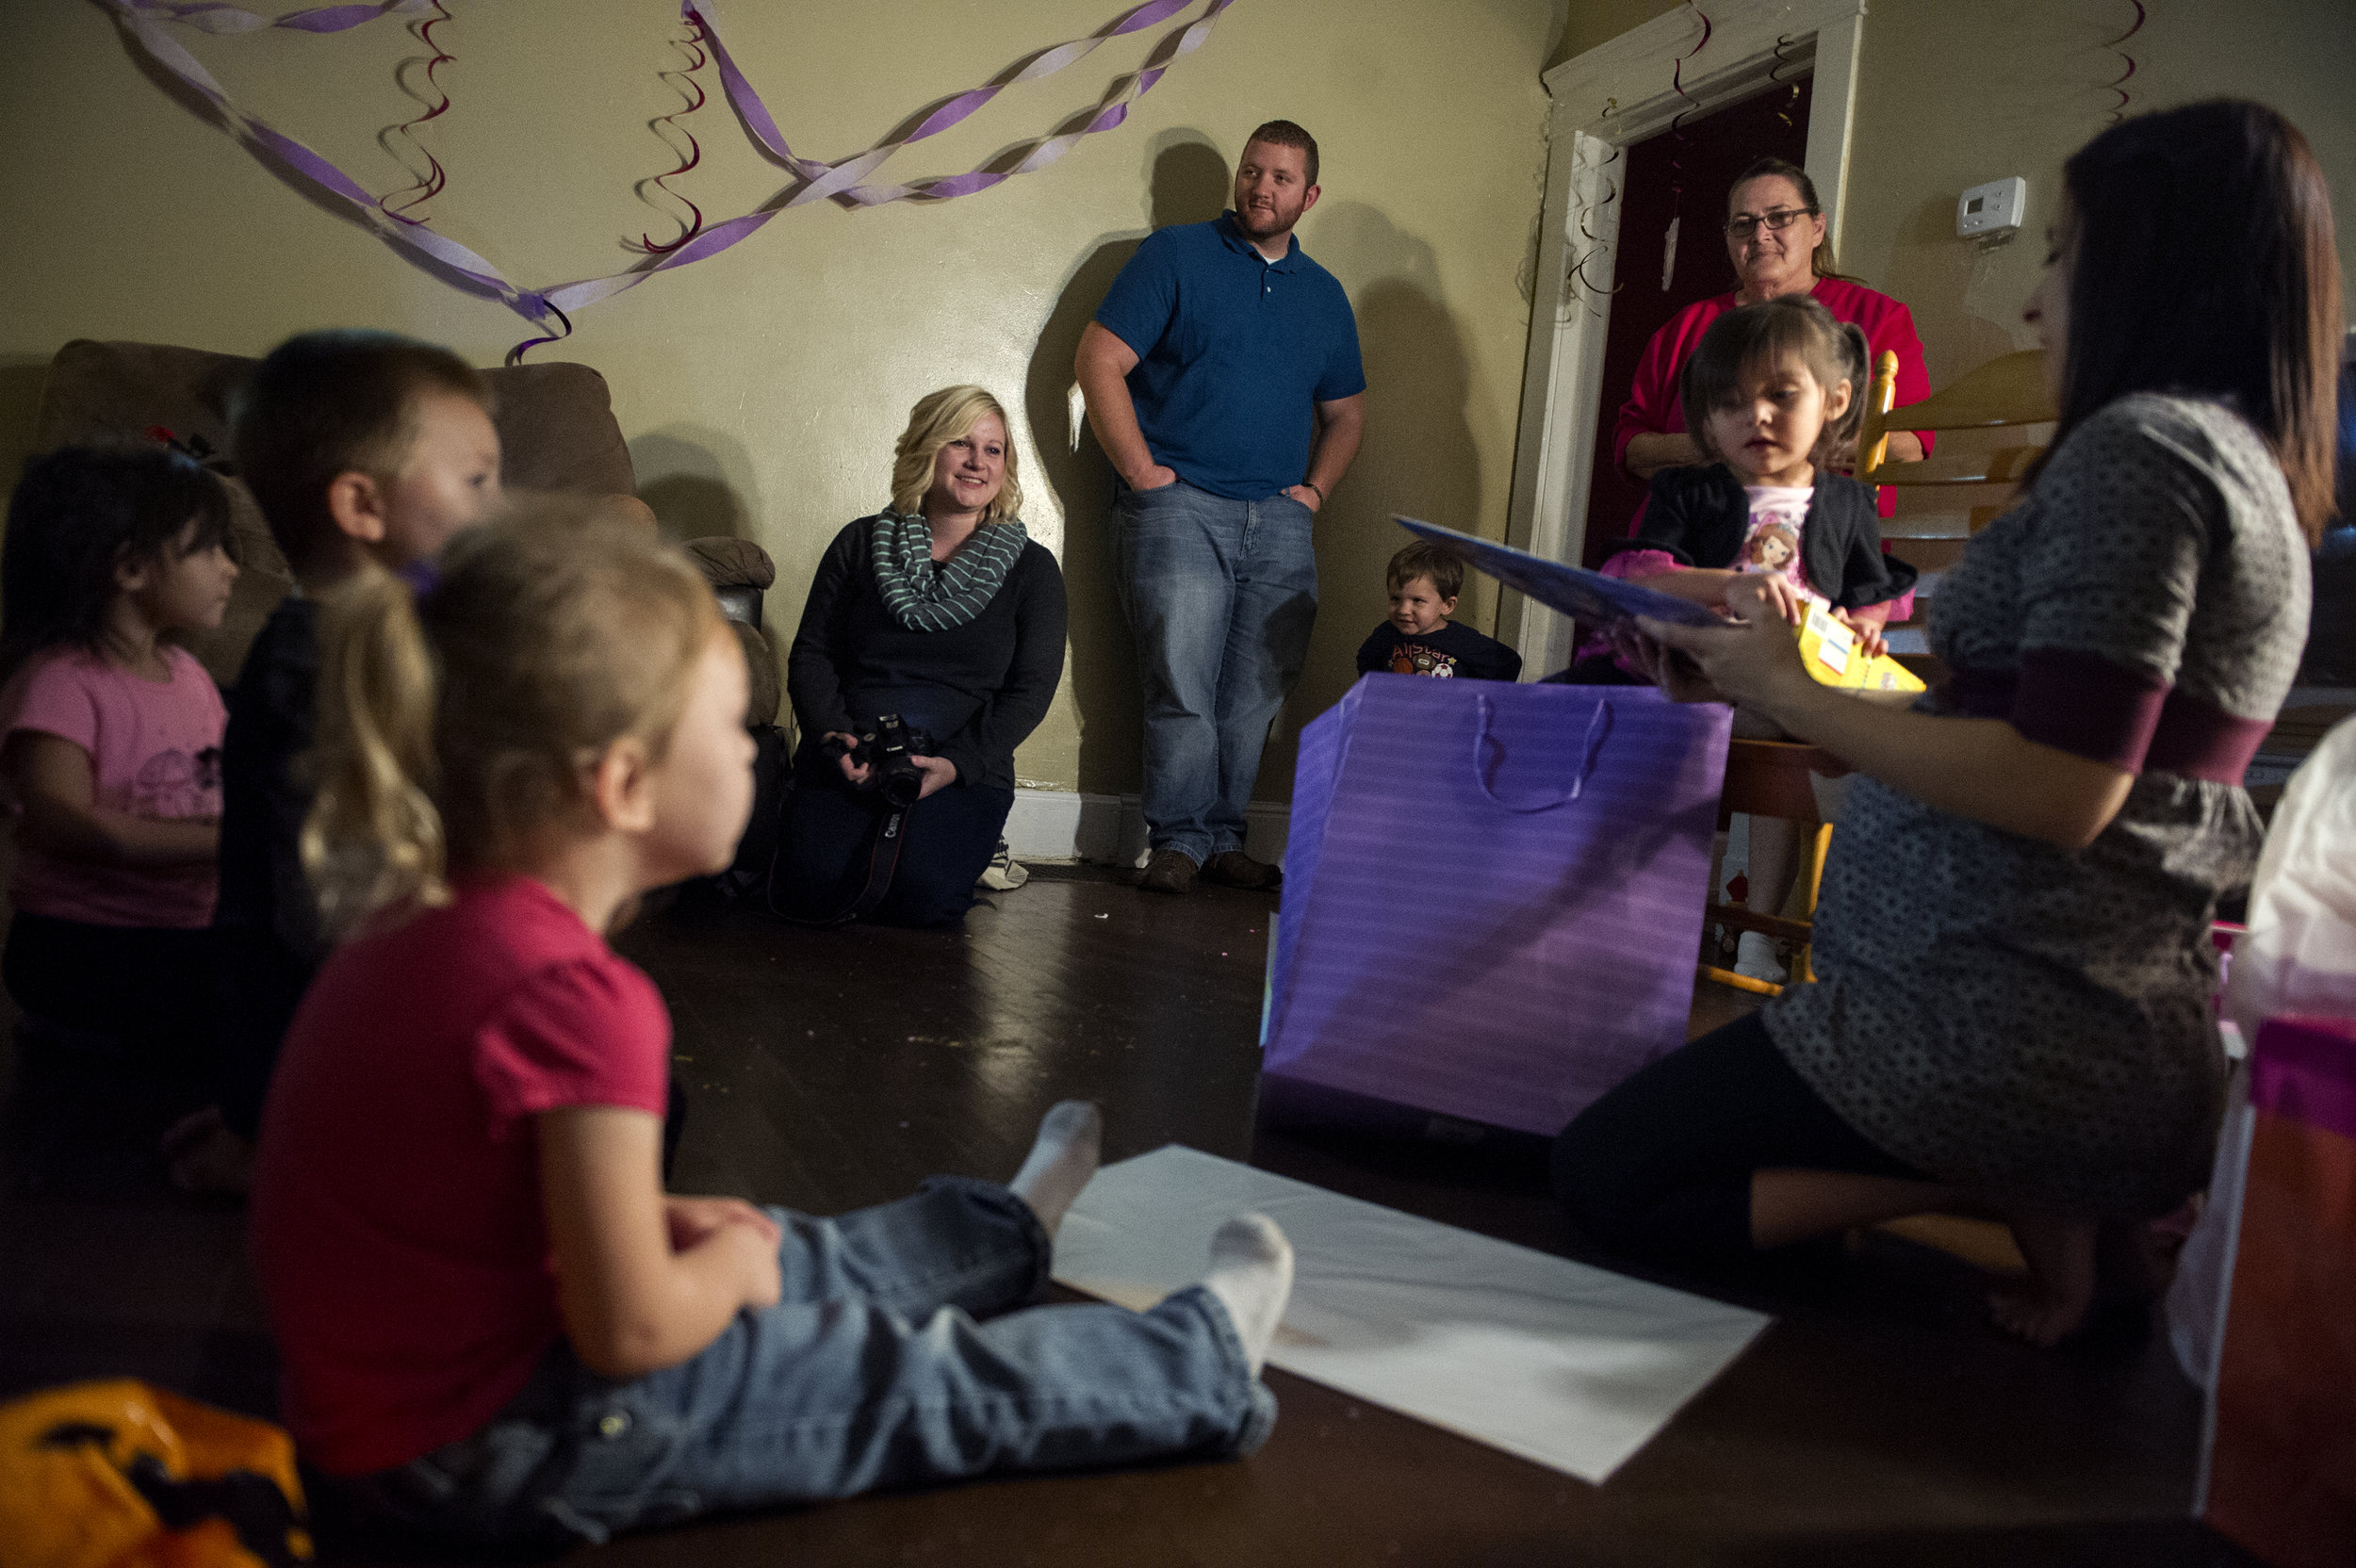  Erickia Wilson (center left) and her husband Michael Wilson (center right) watch as Angelica, the birthmother of the child they will adopt, helps her daughter Prisilla, 3, open presents at her birthday party at Angelica's home in Evansville Friday O